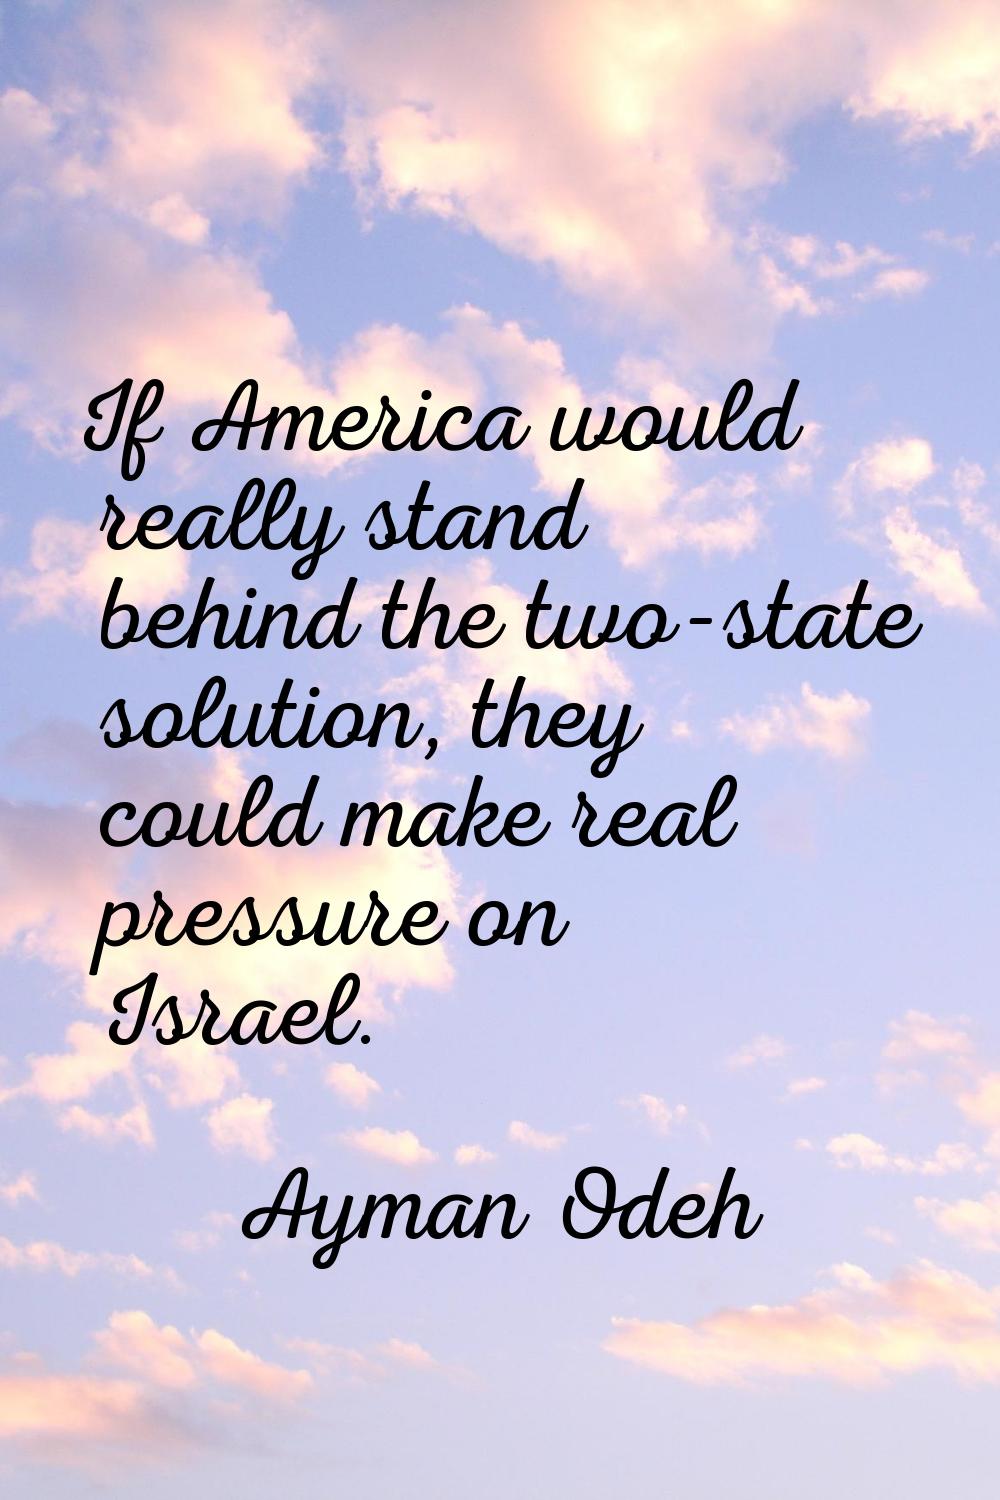 If America would really stand behind the two-state solution, they could make real pressure on Israe